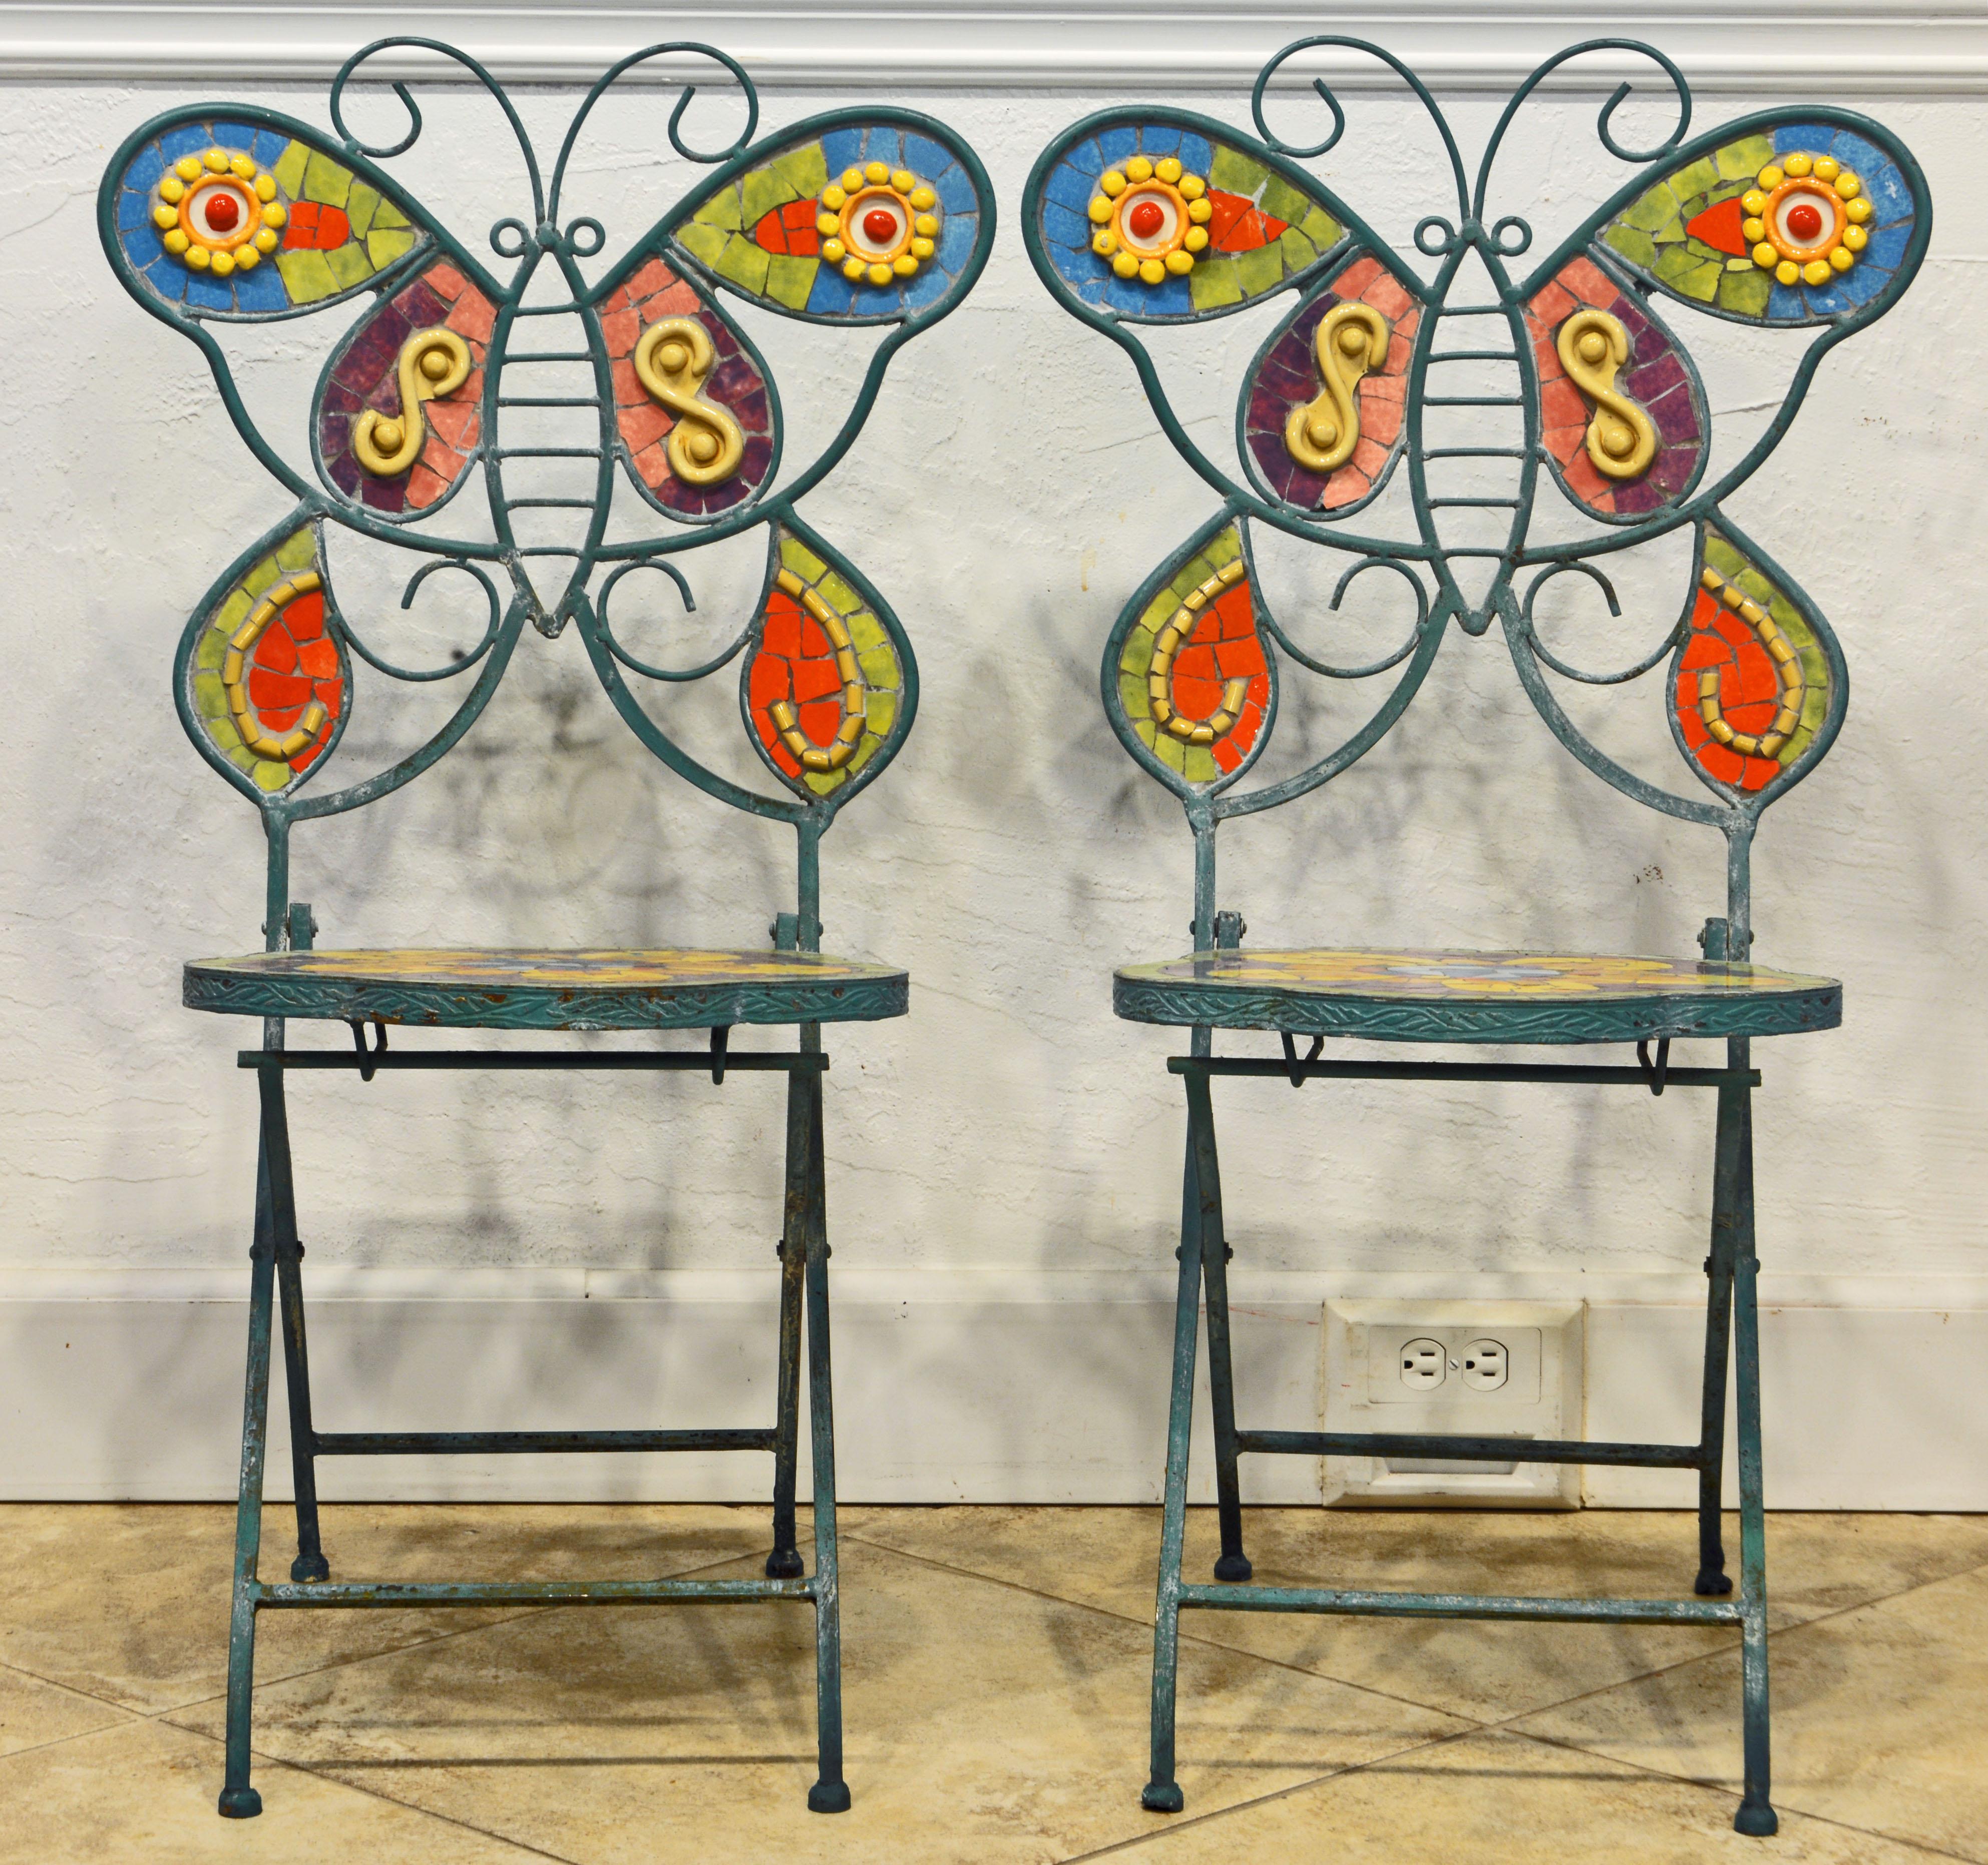 These uniquely artful butterfly chairs with inlaid colorful ceramic mosaic on seats and backs have been used outdoors but could also add the right touch to certain indoor settings. They date to the mid-20th century and the paint shows some rusty